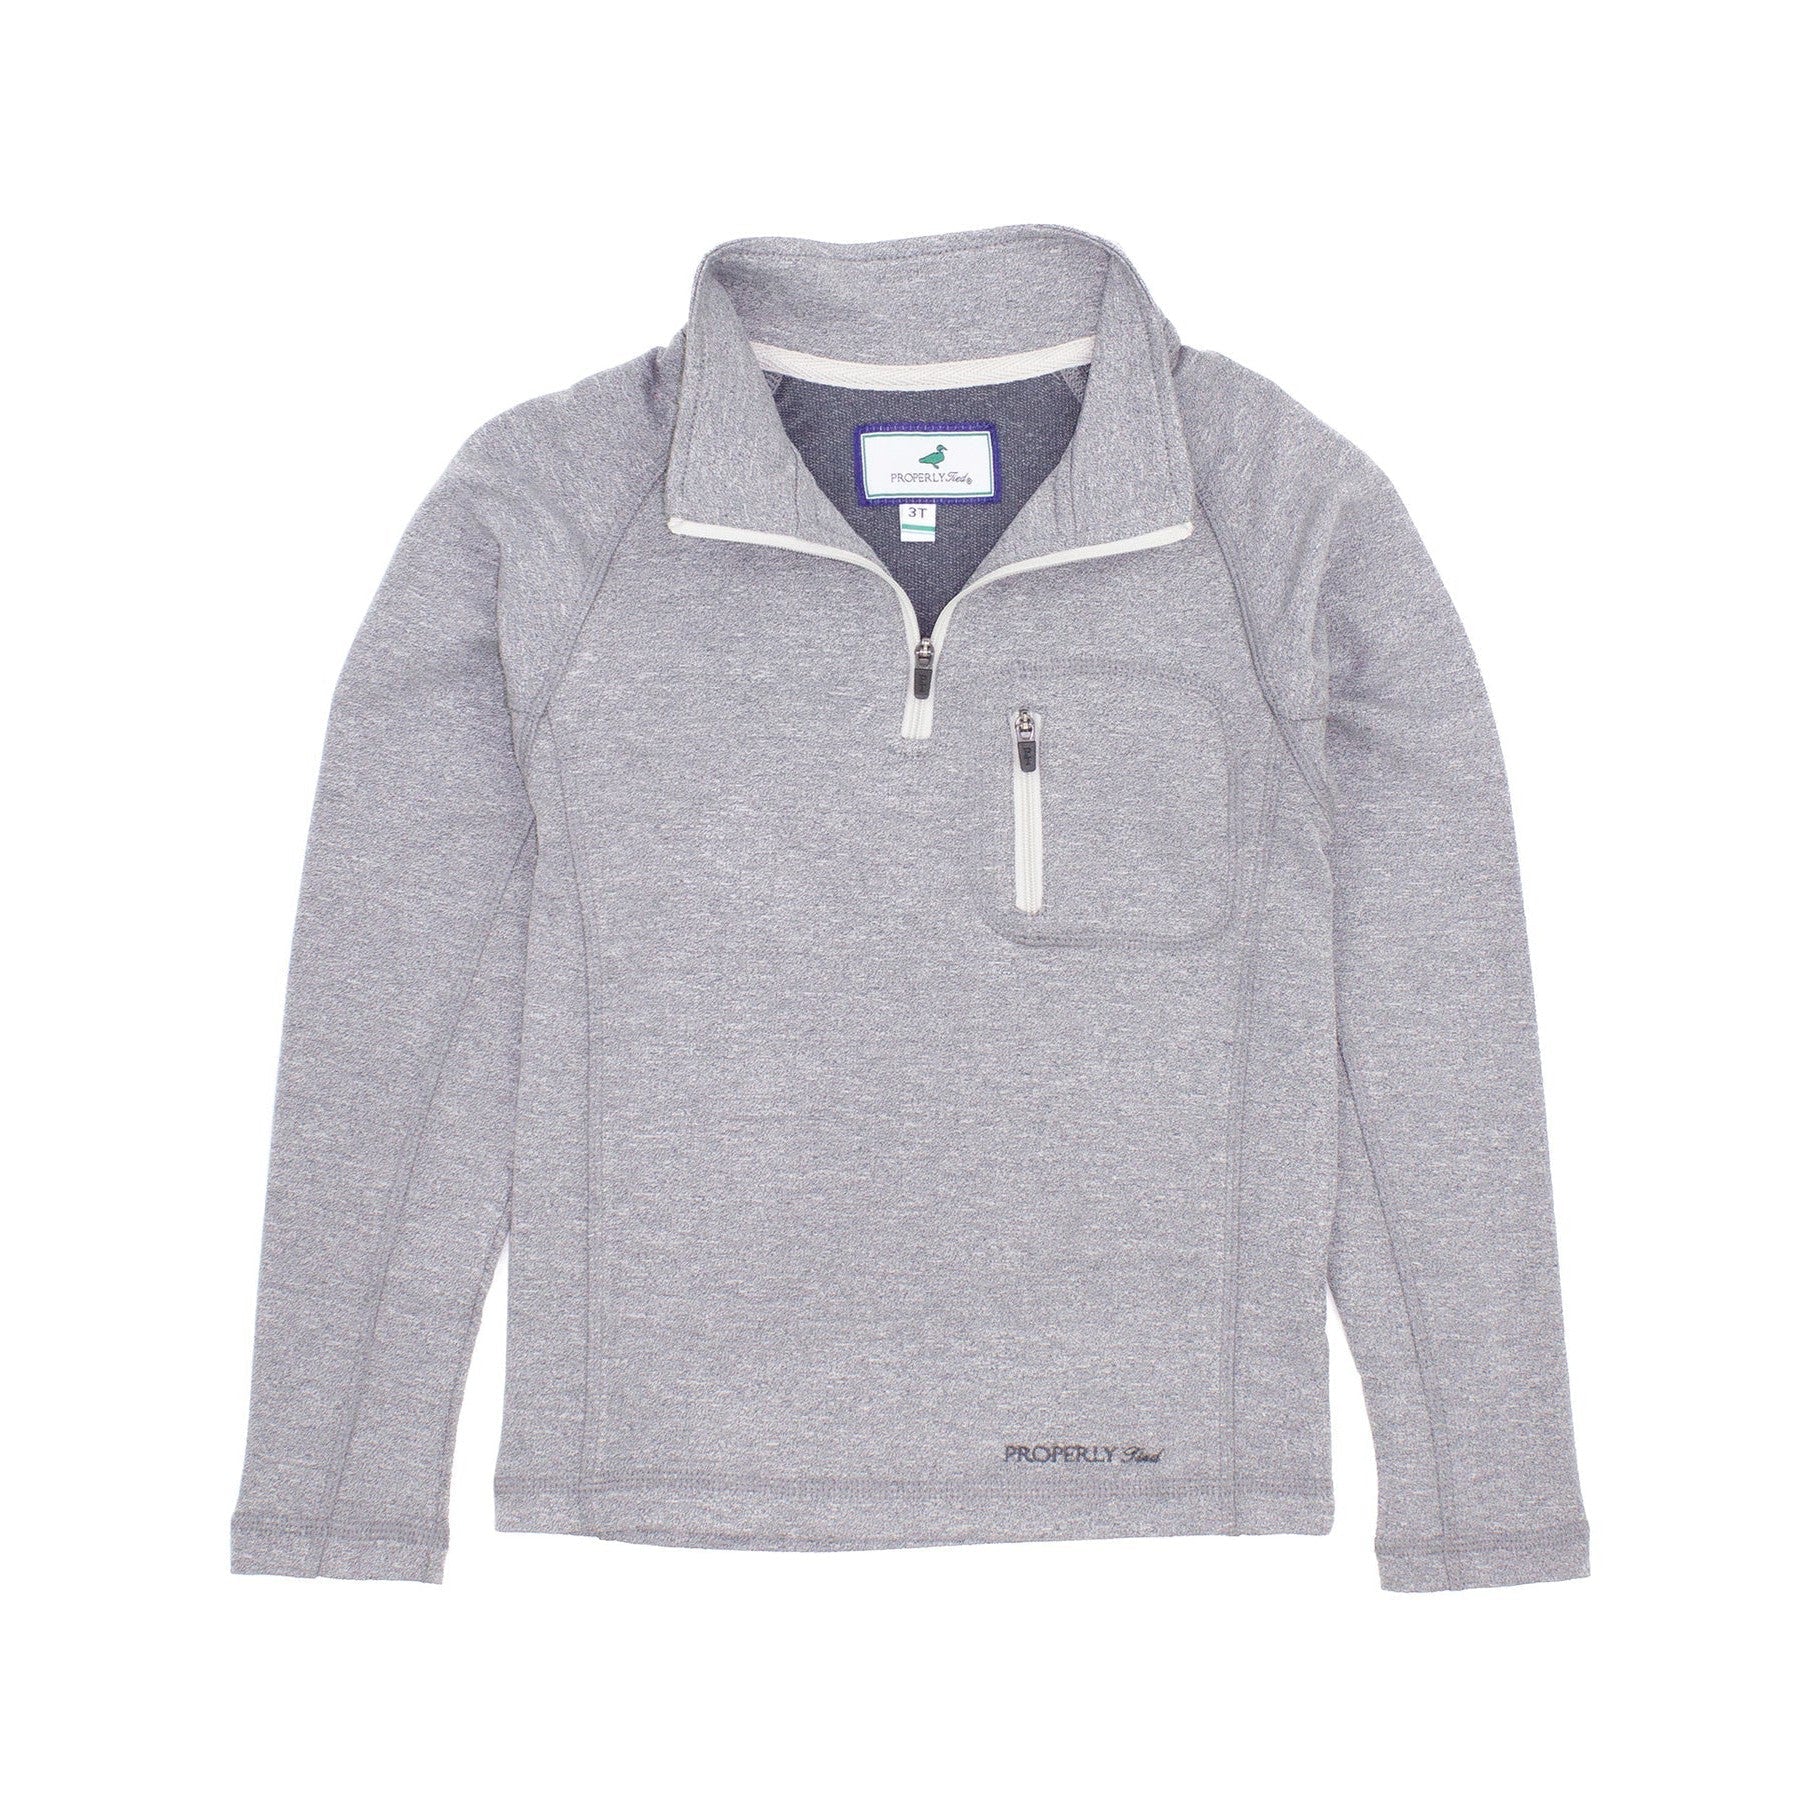 Properly Tied Boys Bay Pullover - Gravel-Properly Tied-Little Giant Kidz